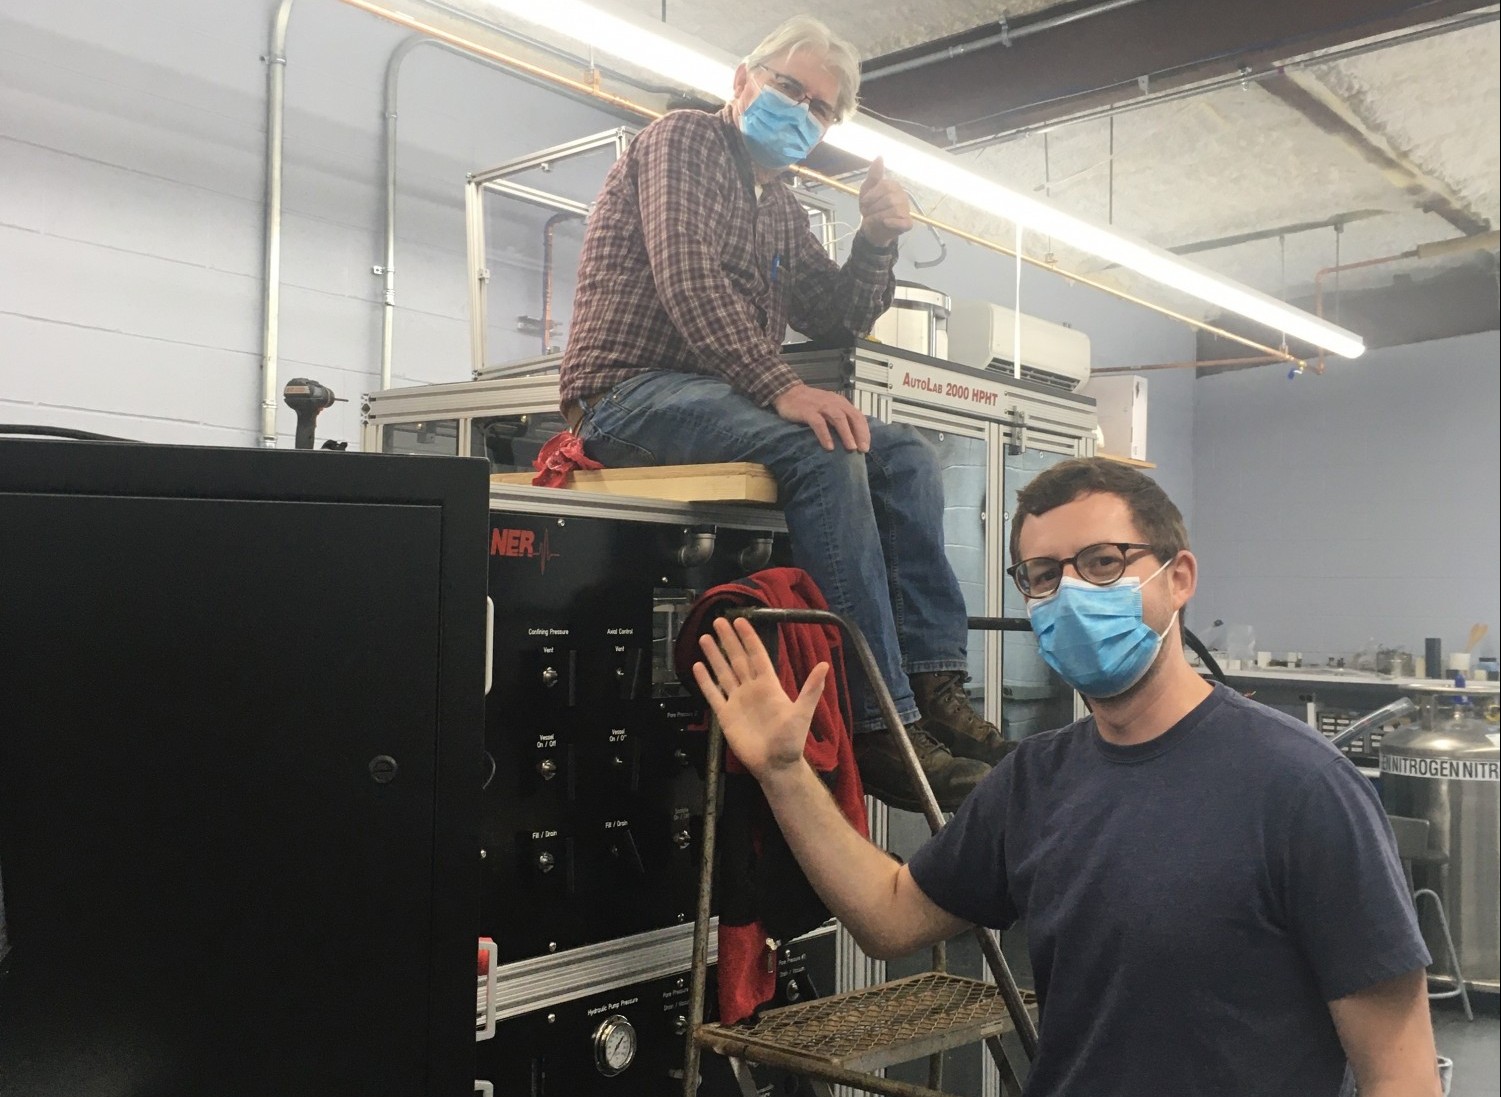 Jake Tielke and Ted Koczynski work on the triaxial apparatus from NER (2021).